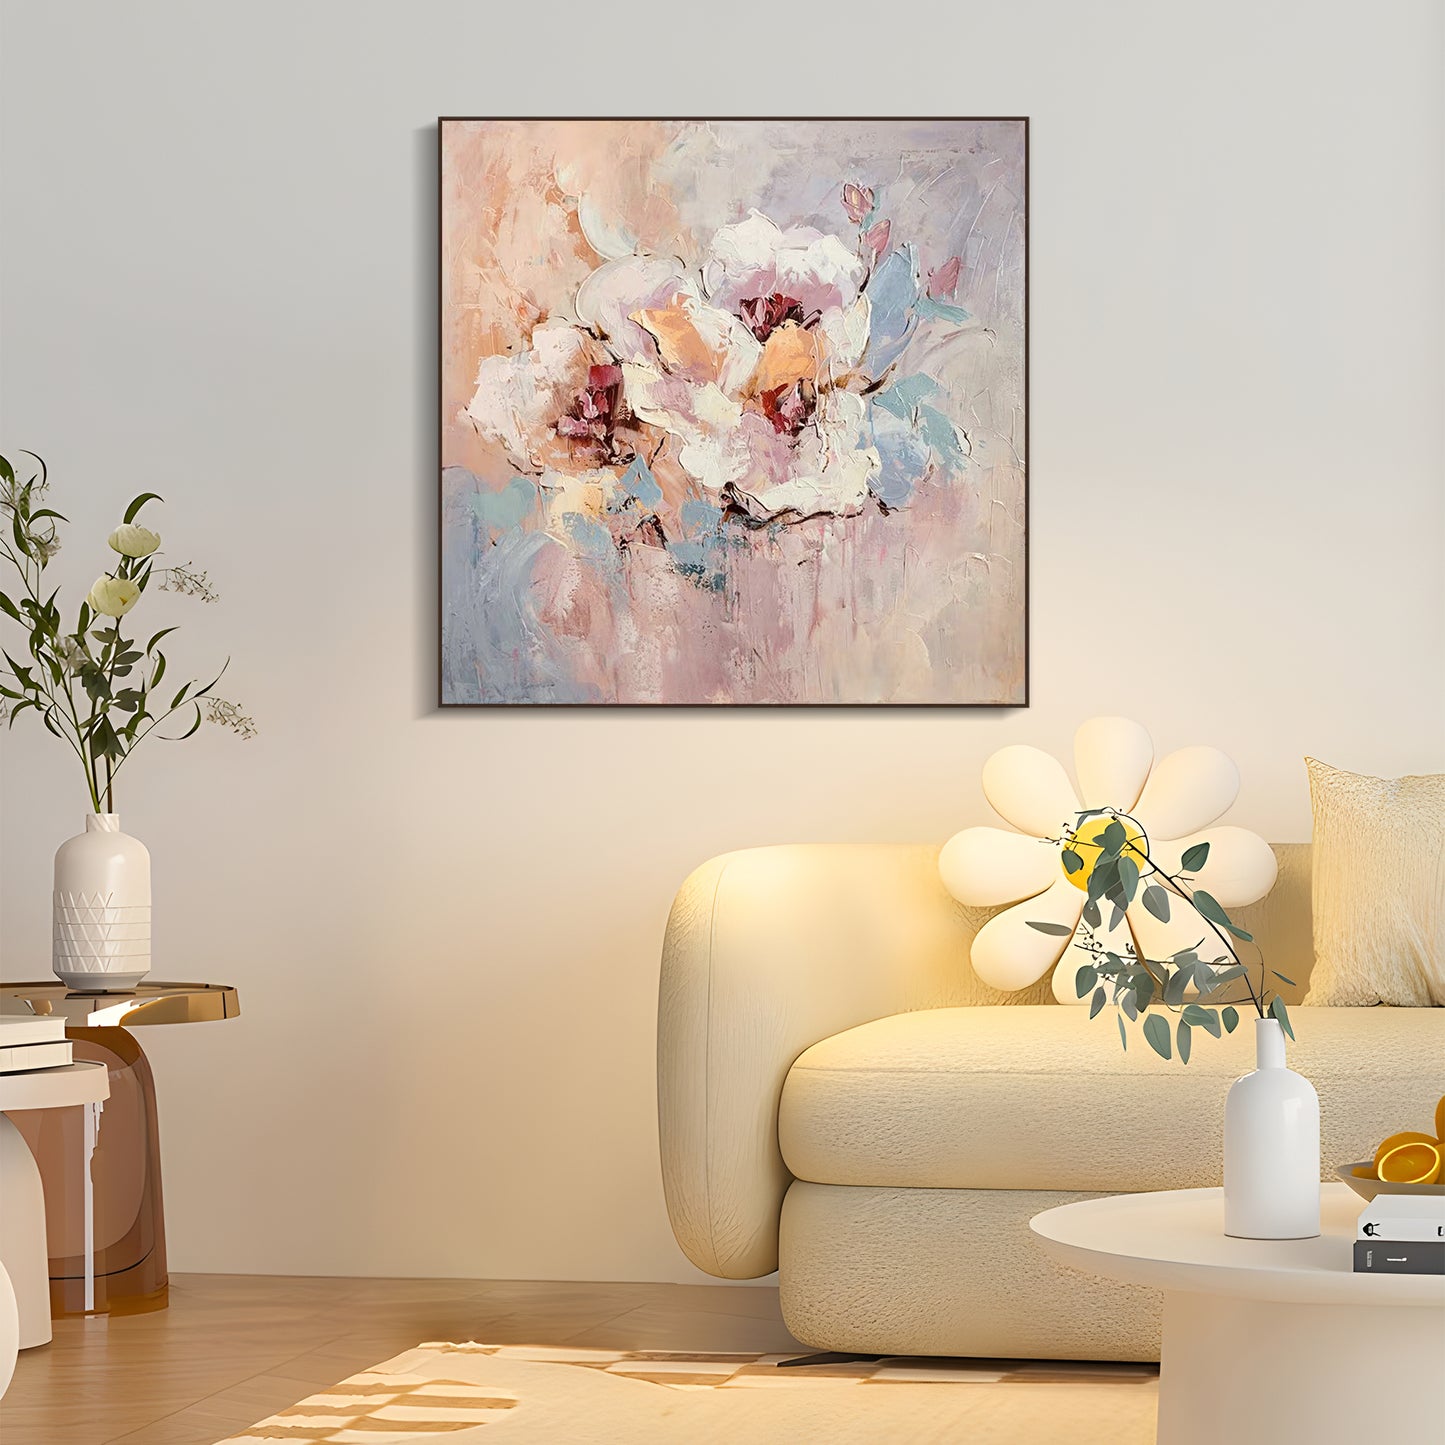 FLOWER PAINTING, IMPRESSION PINK FLOWER, HAND-PAINTED CANVAS